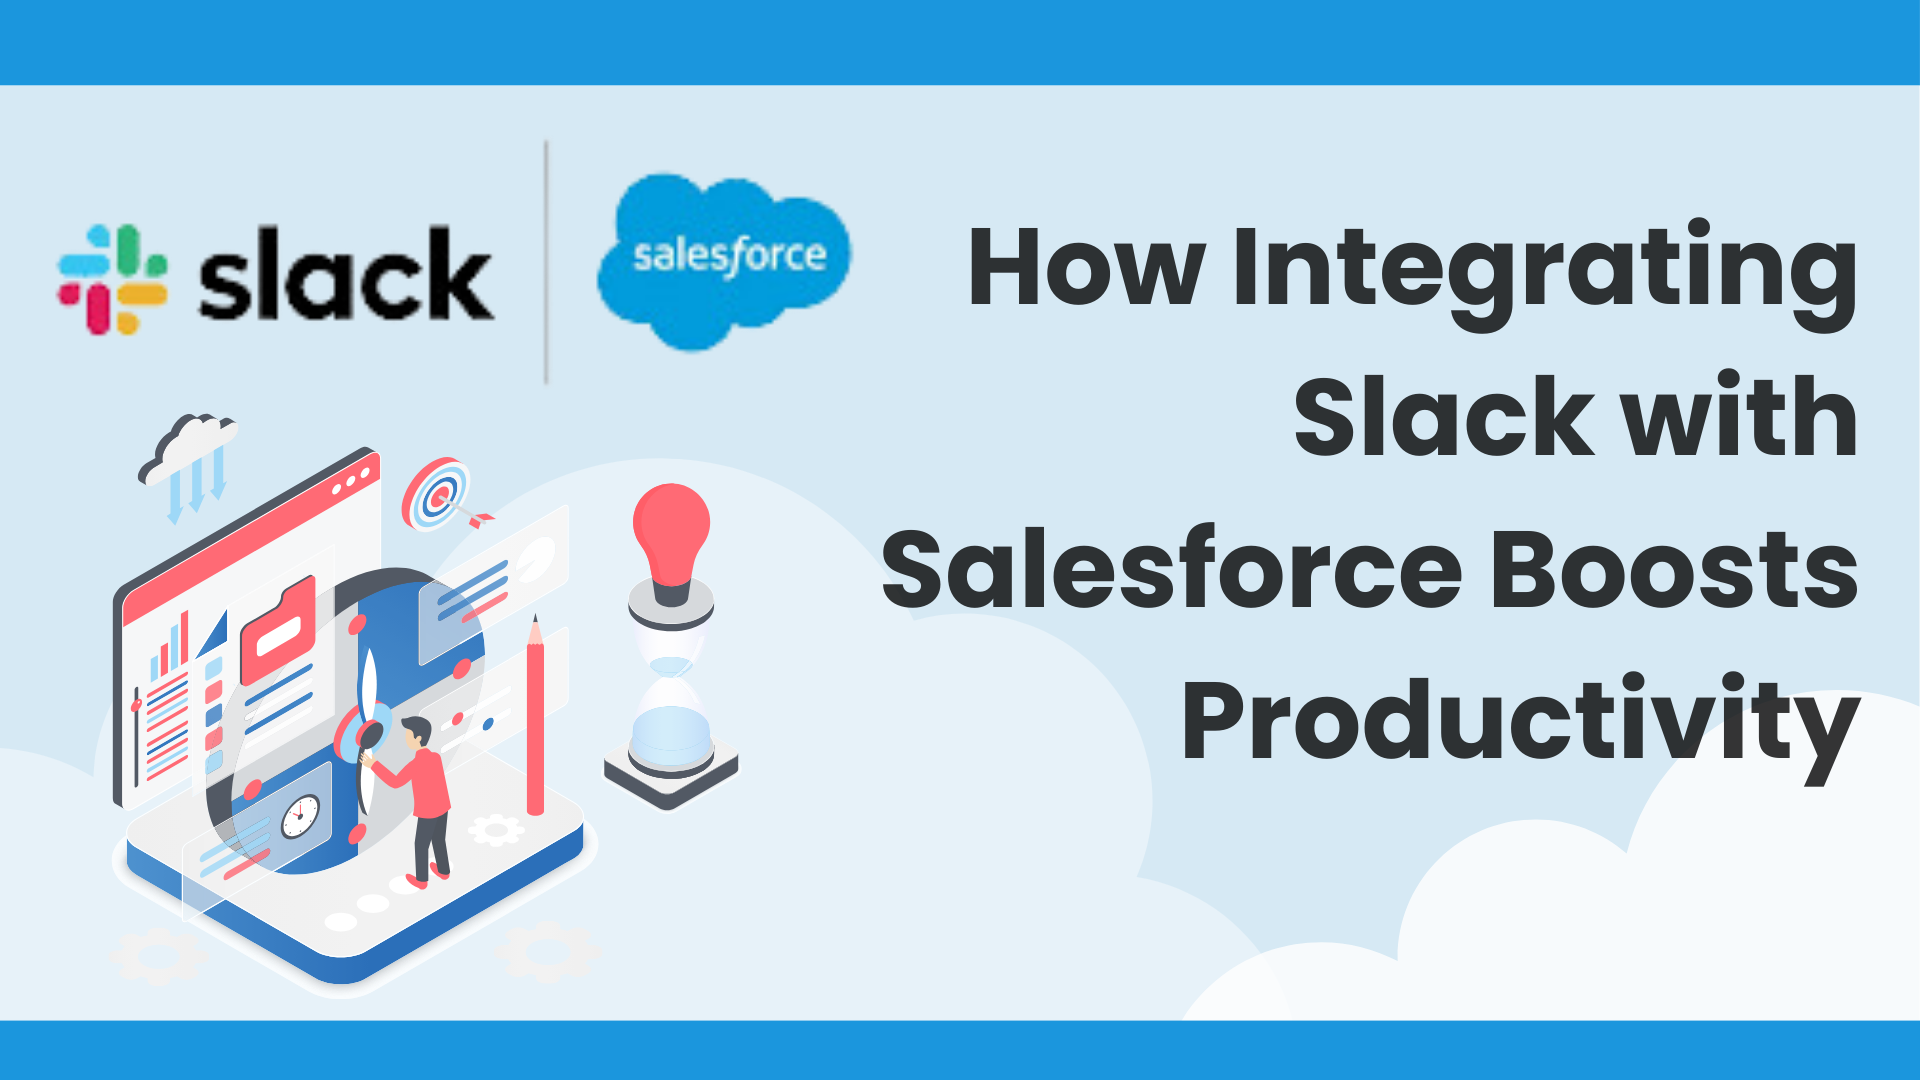 Integrating Slack with Salesforce Boosts Productivity